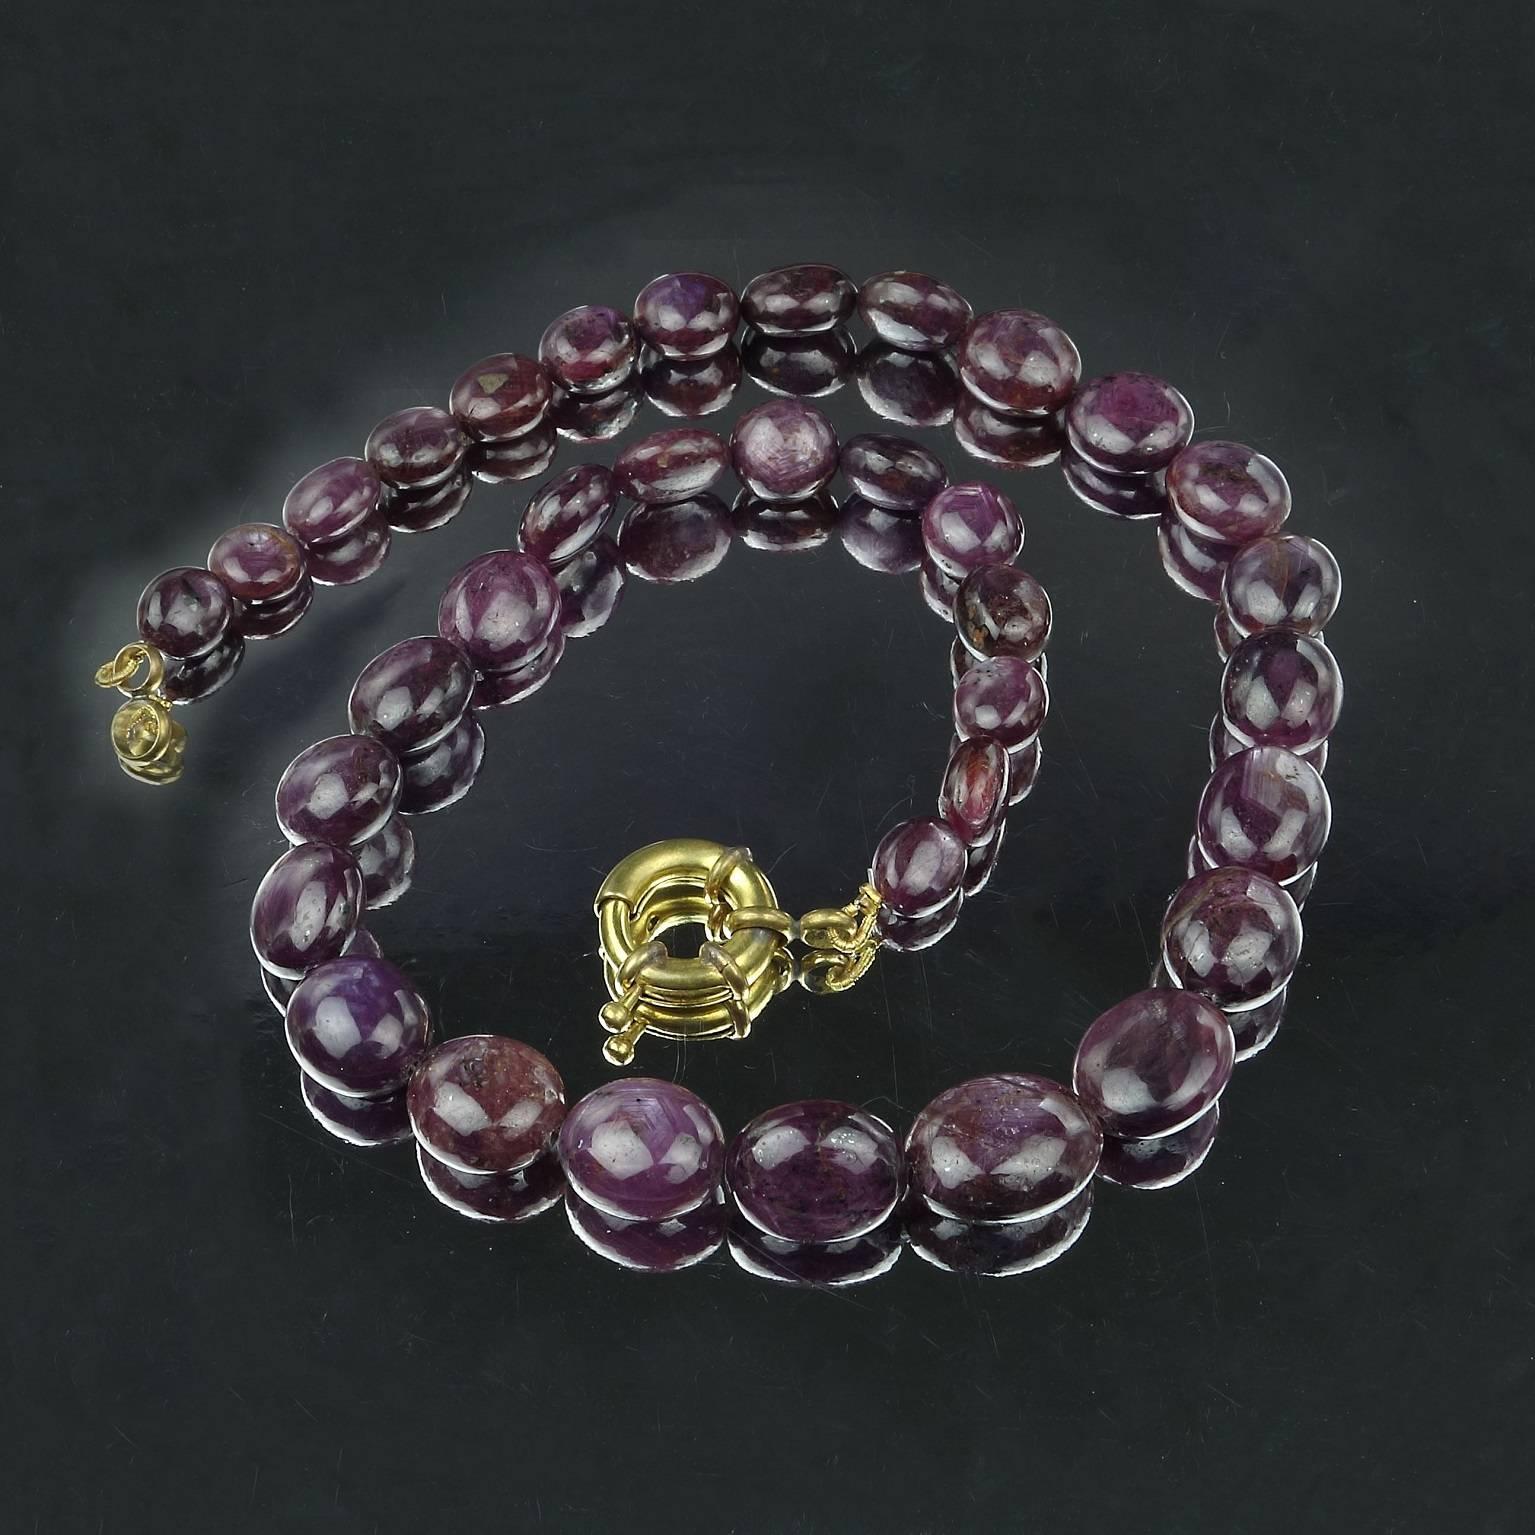 18.5 Inch, custom made necklace of graduated Rubies.  These beauties will grace your neck and love you back as much as you love them.  This unique necklace graduates from 10x8mm to 16x13mm, and the color is a deep purple-mauve. The necklace is